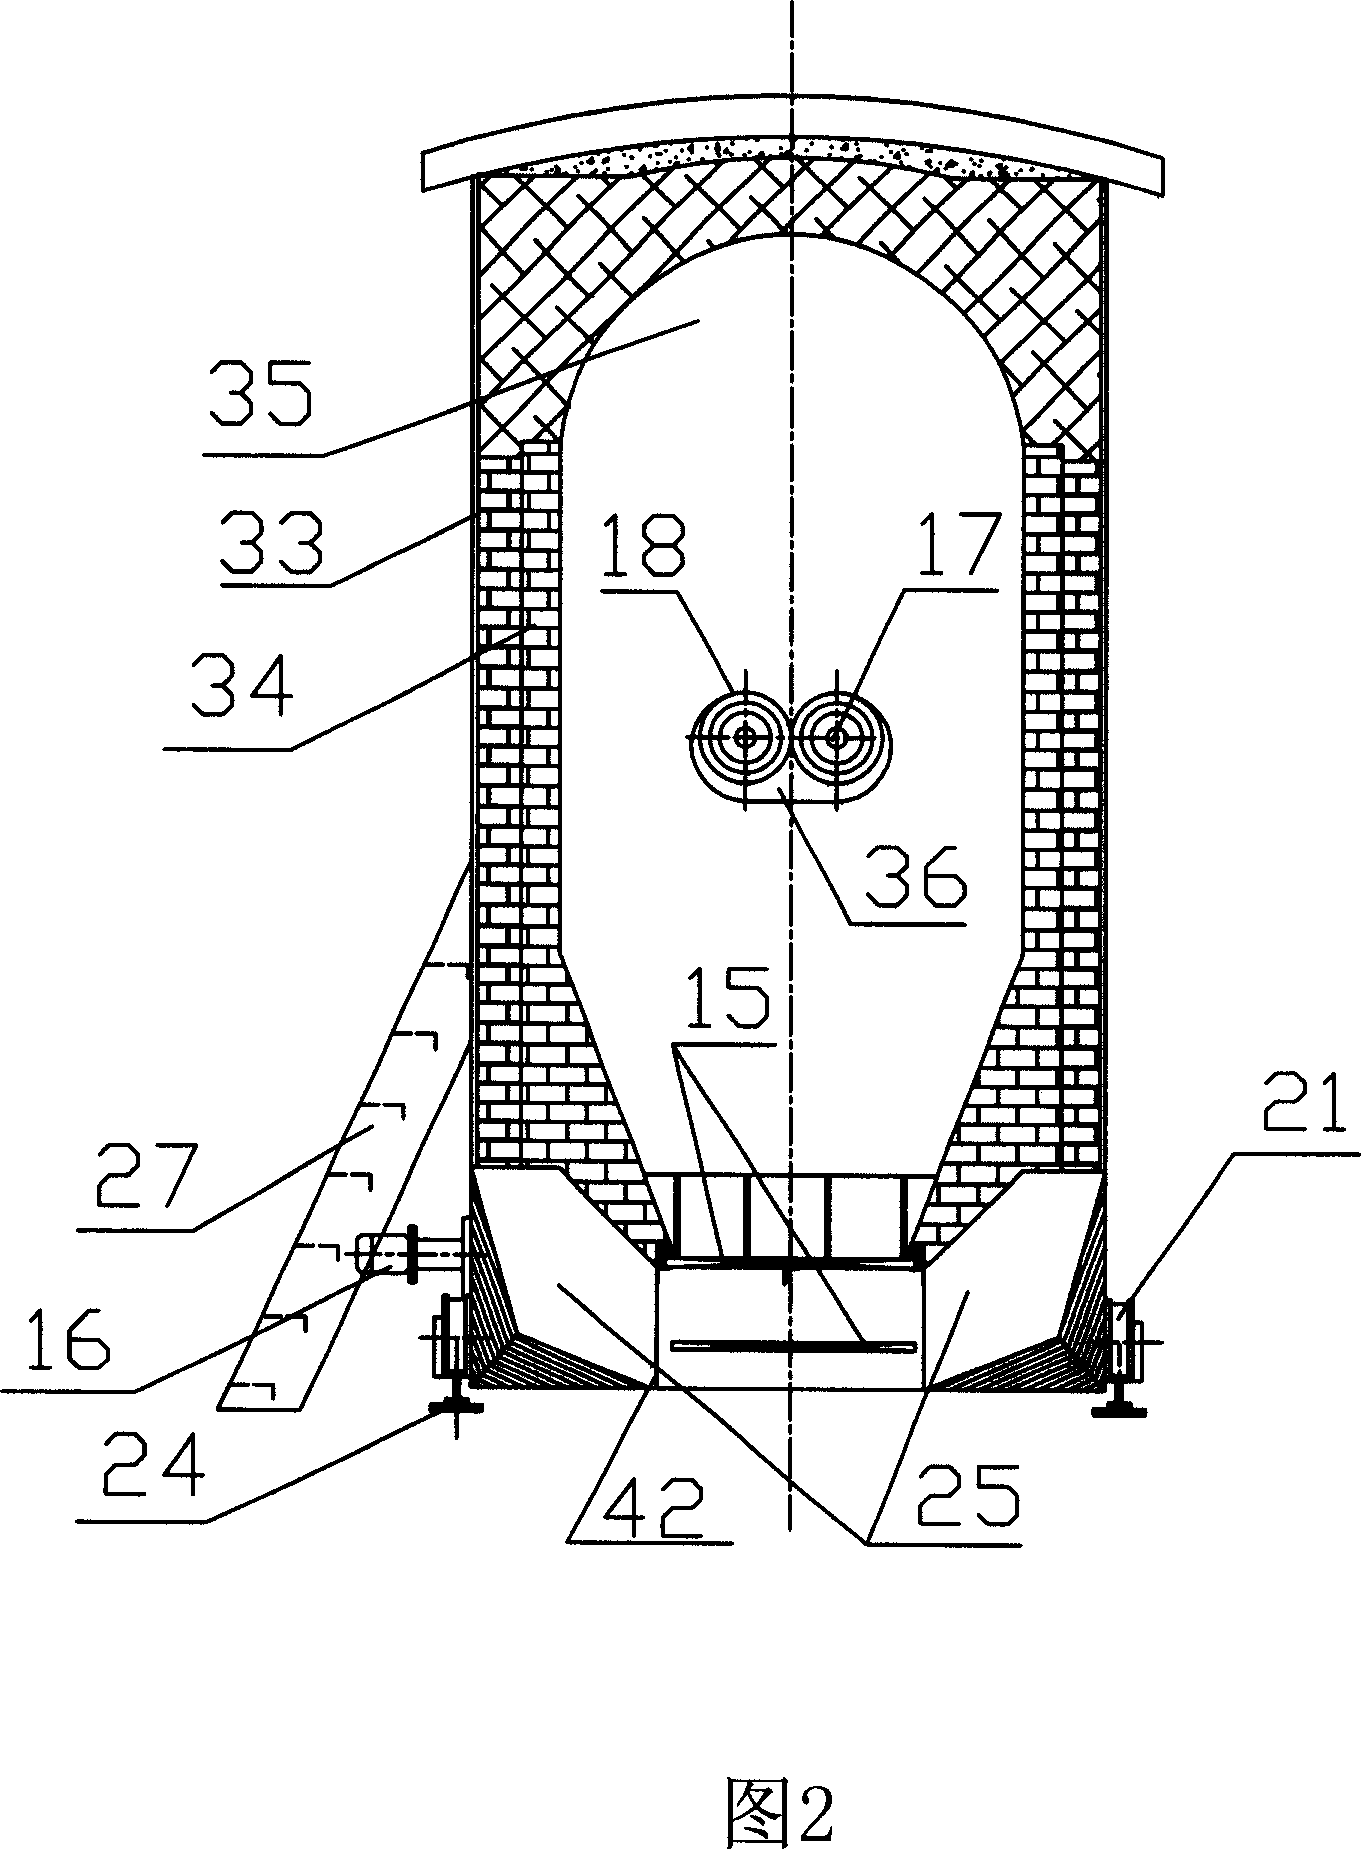 Coal-water slurry combustion method and its combustion equipment